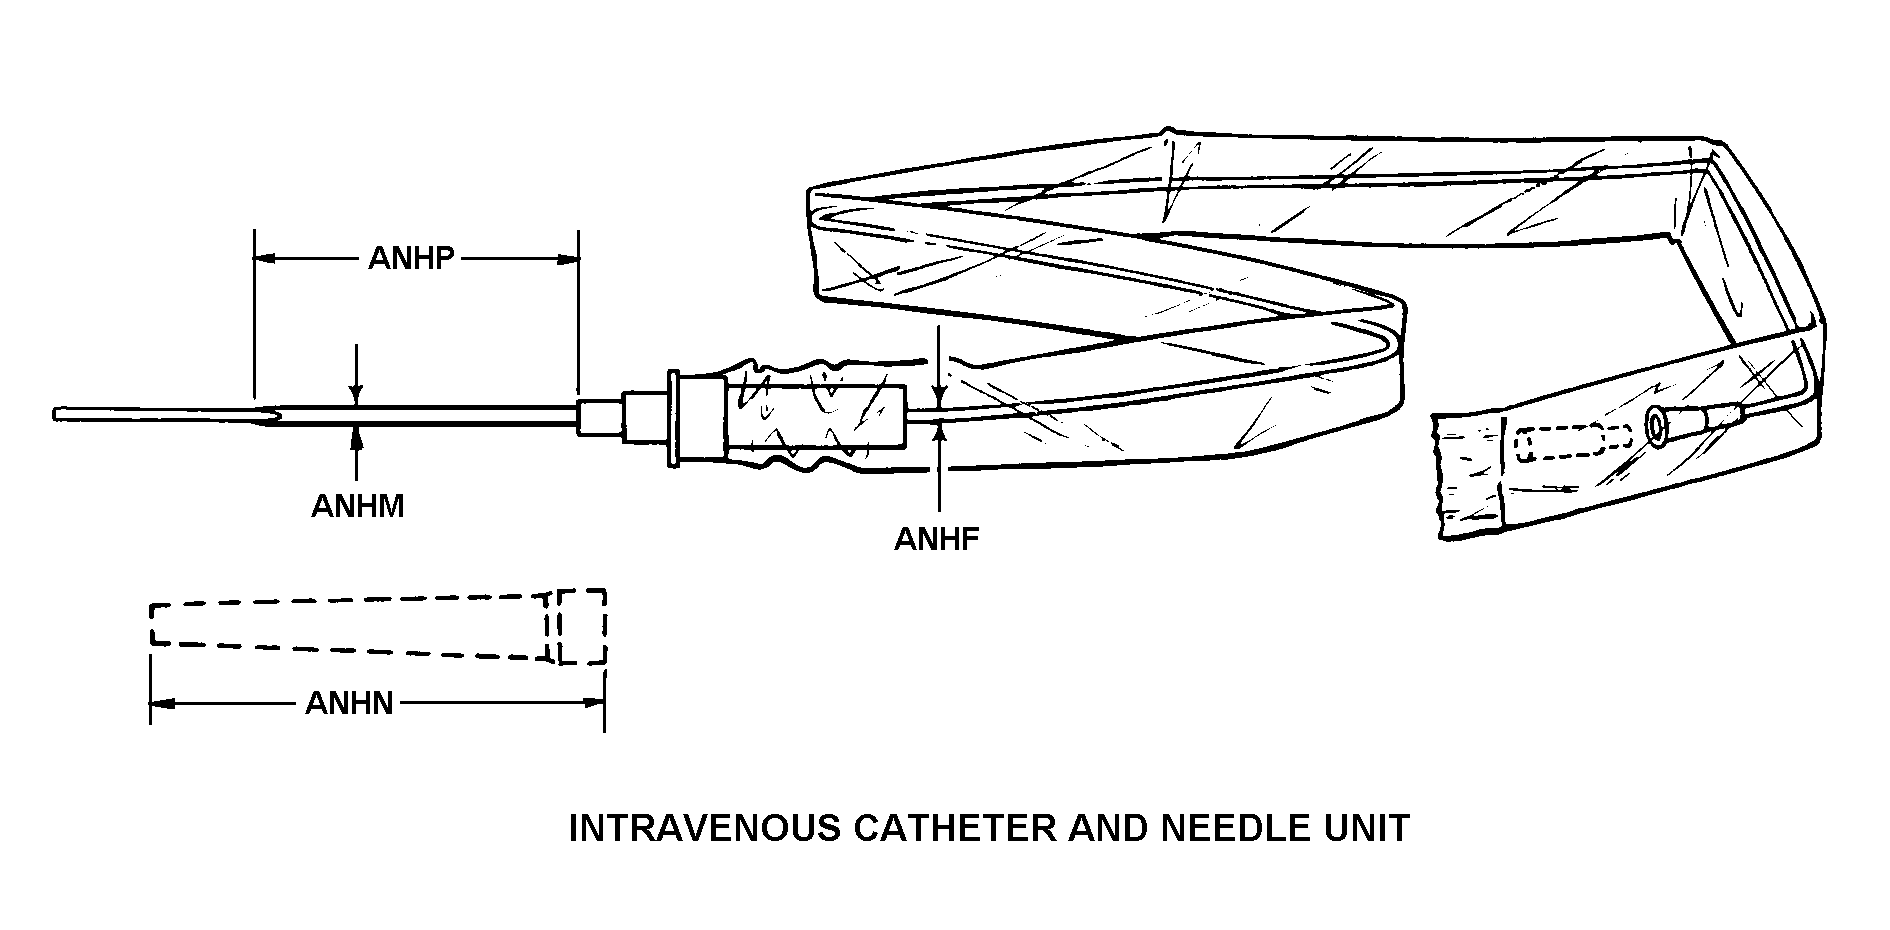 INTRAVENOUS CATHETER AND NEEDLE UNIT style nsn 6515-01-451-0881